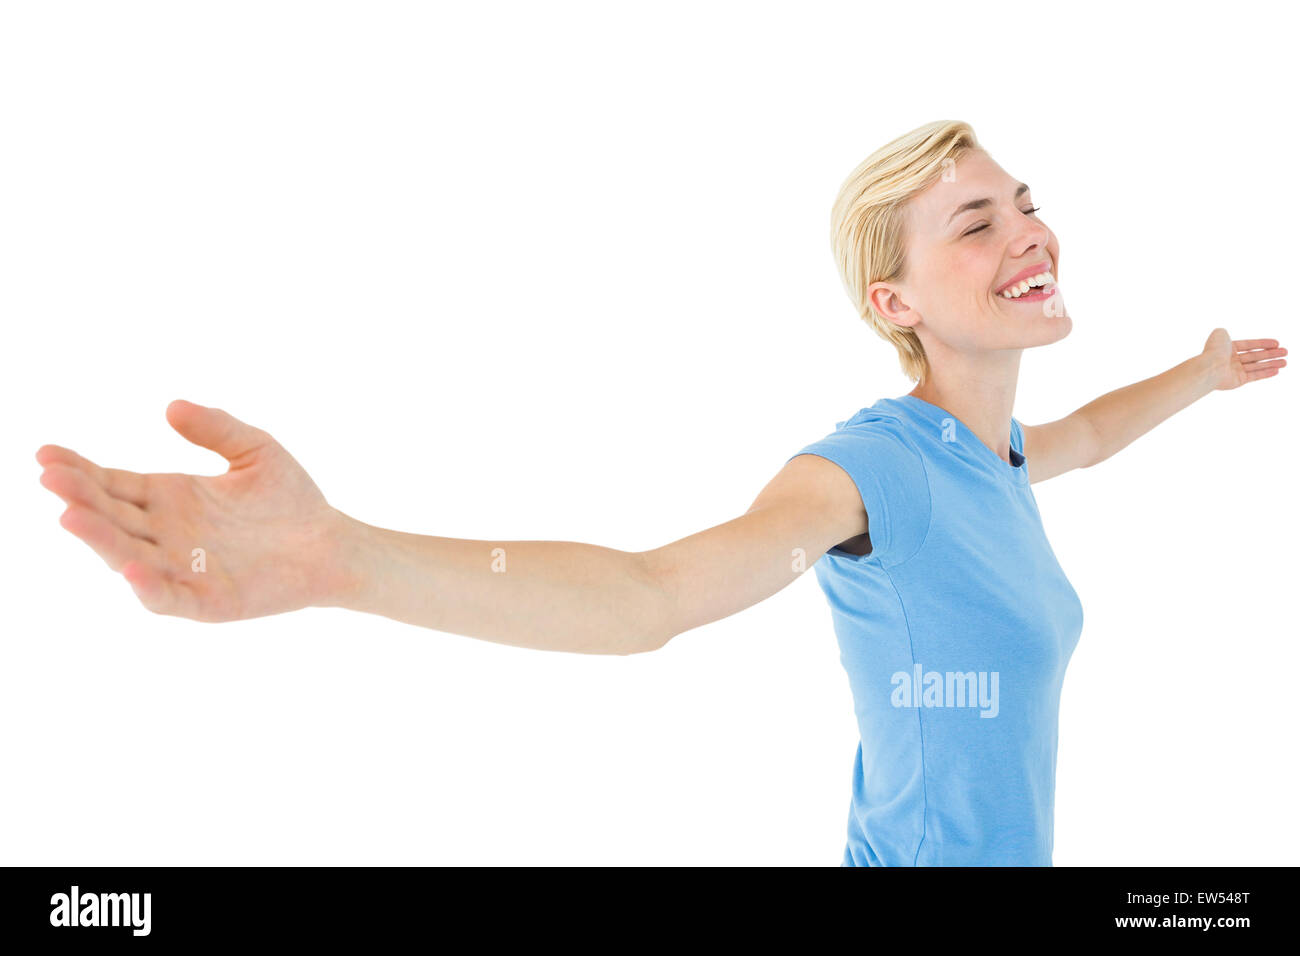 Blonde woman standing arms outstretched Stock Photo